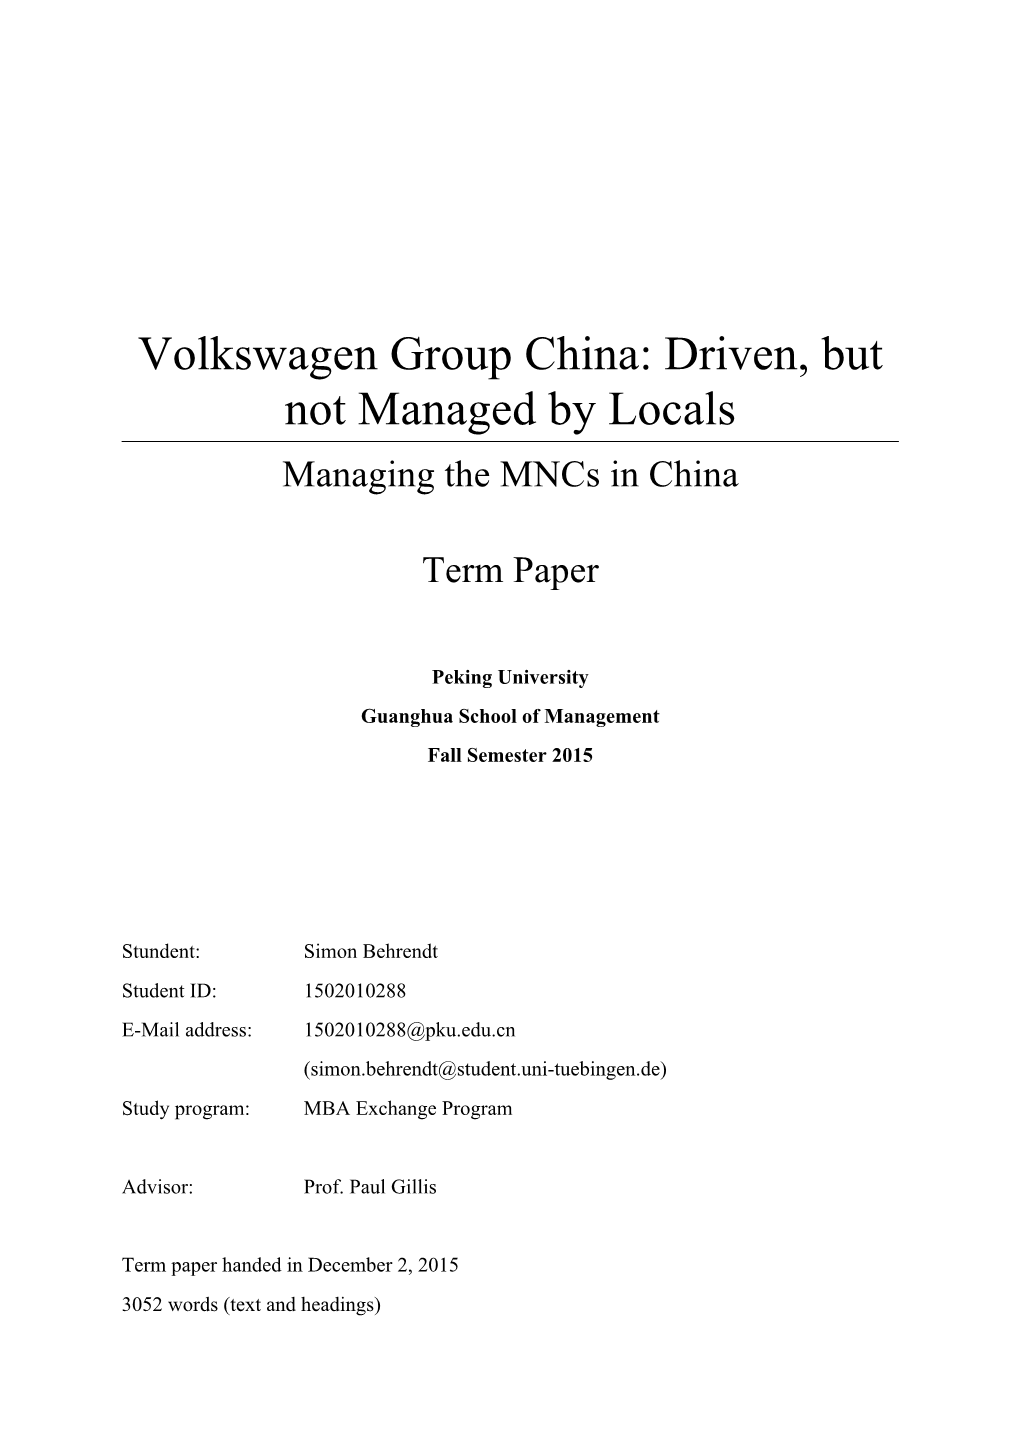 Volkswagen Group China: Driven, but Not Managed by Locals Managing the Mncs in China